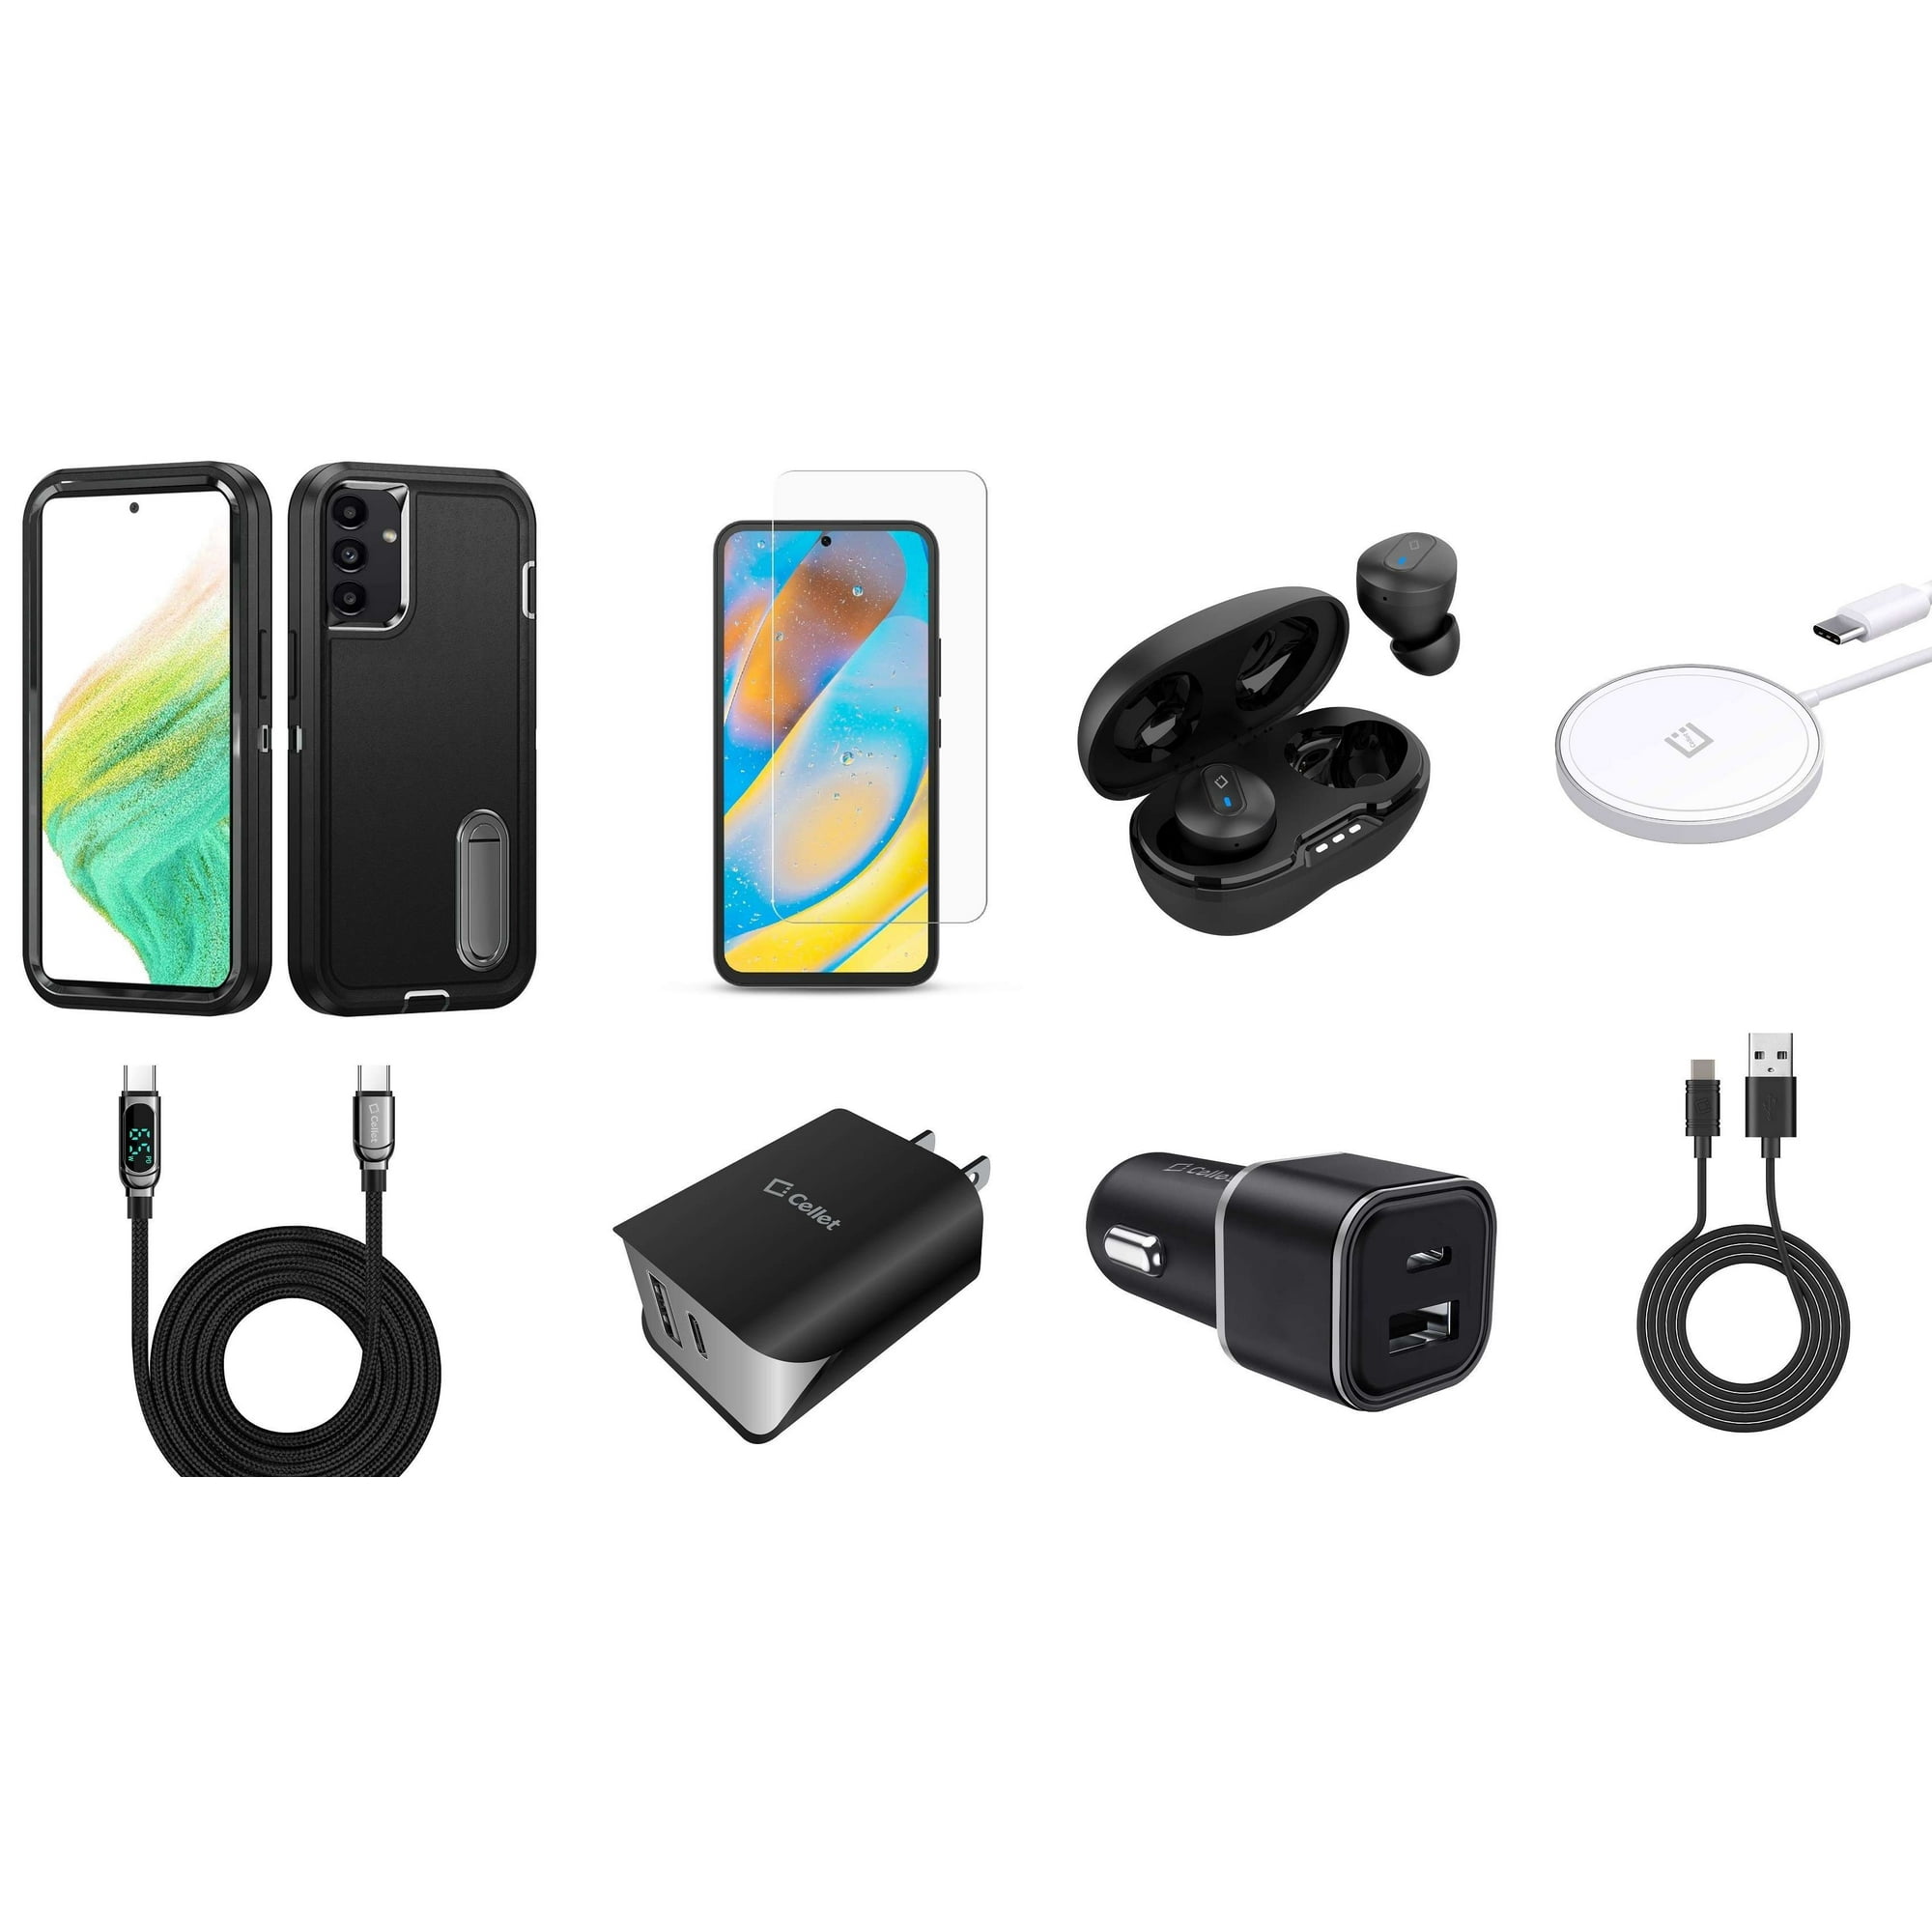 bestyrelse nyheder hævn BD Combo Bundle Case for Samsung Galaxy A54 5G Case - (Black) Tough Rugged  Protector Stand Cover with Screen Protectors, Earbuds, Wireless Charger,  Car & Wall Chargers, Digital USB-C Cable - Walmart.com